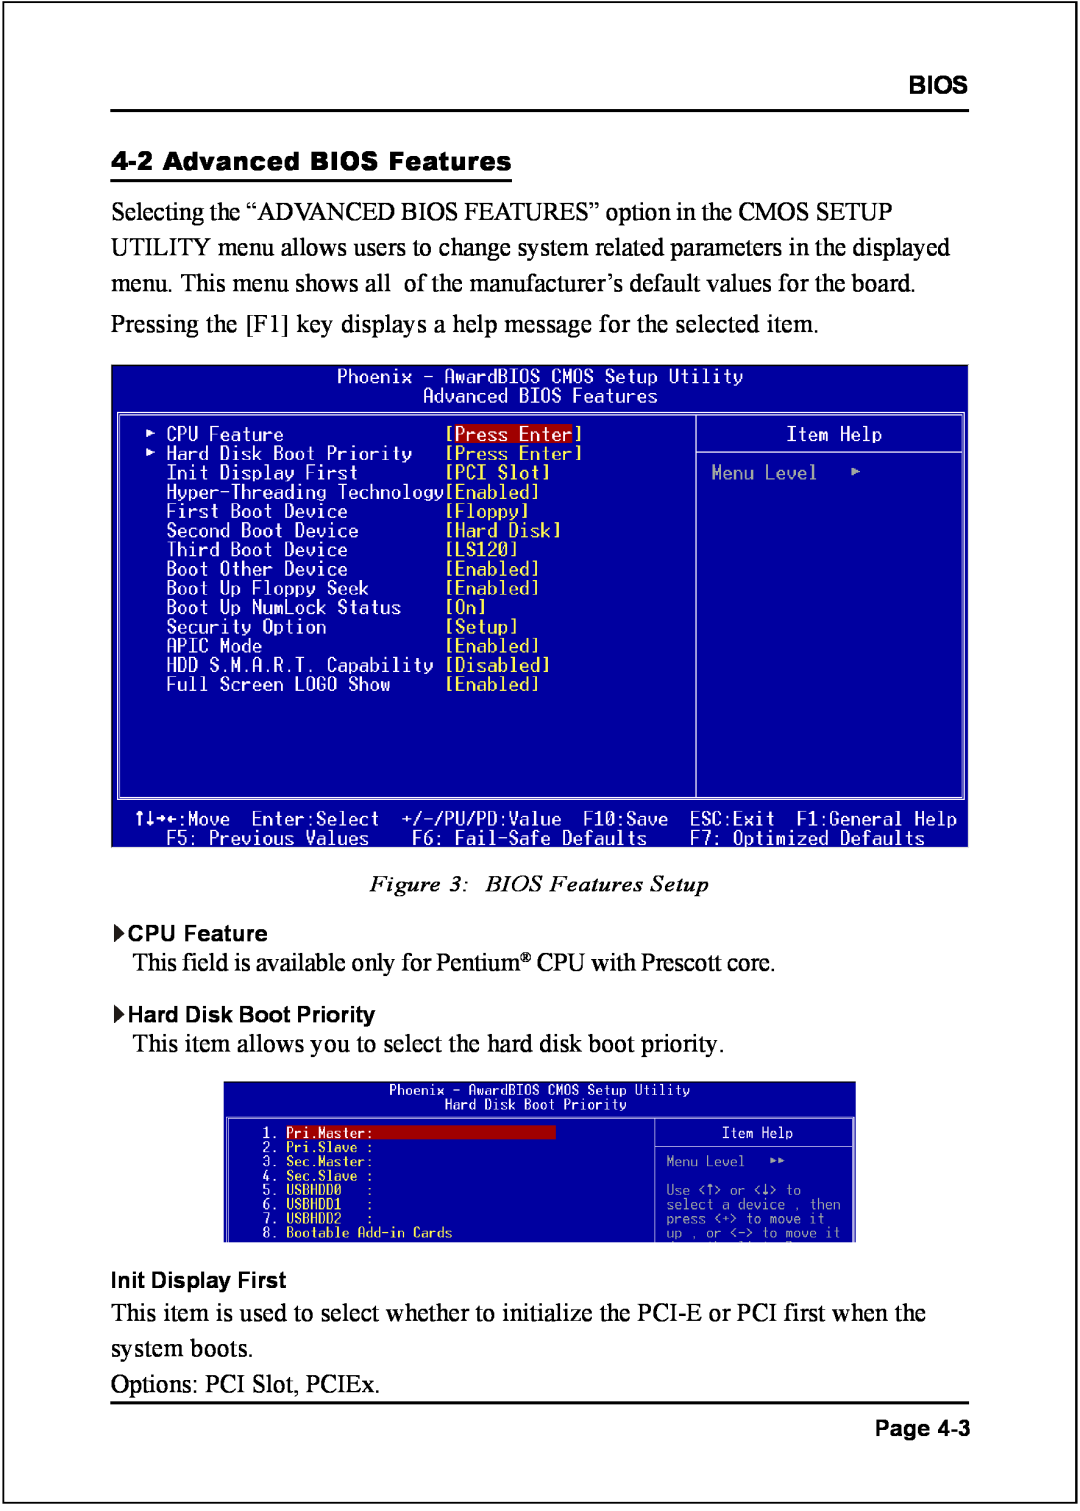 Intel I945P specifications BIOS 4-2 Advanced BIOS Features 